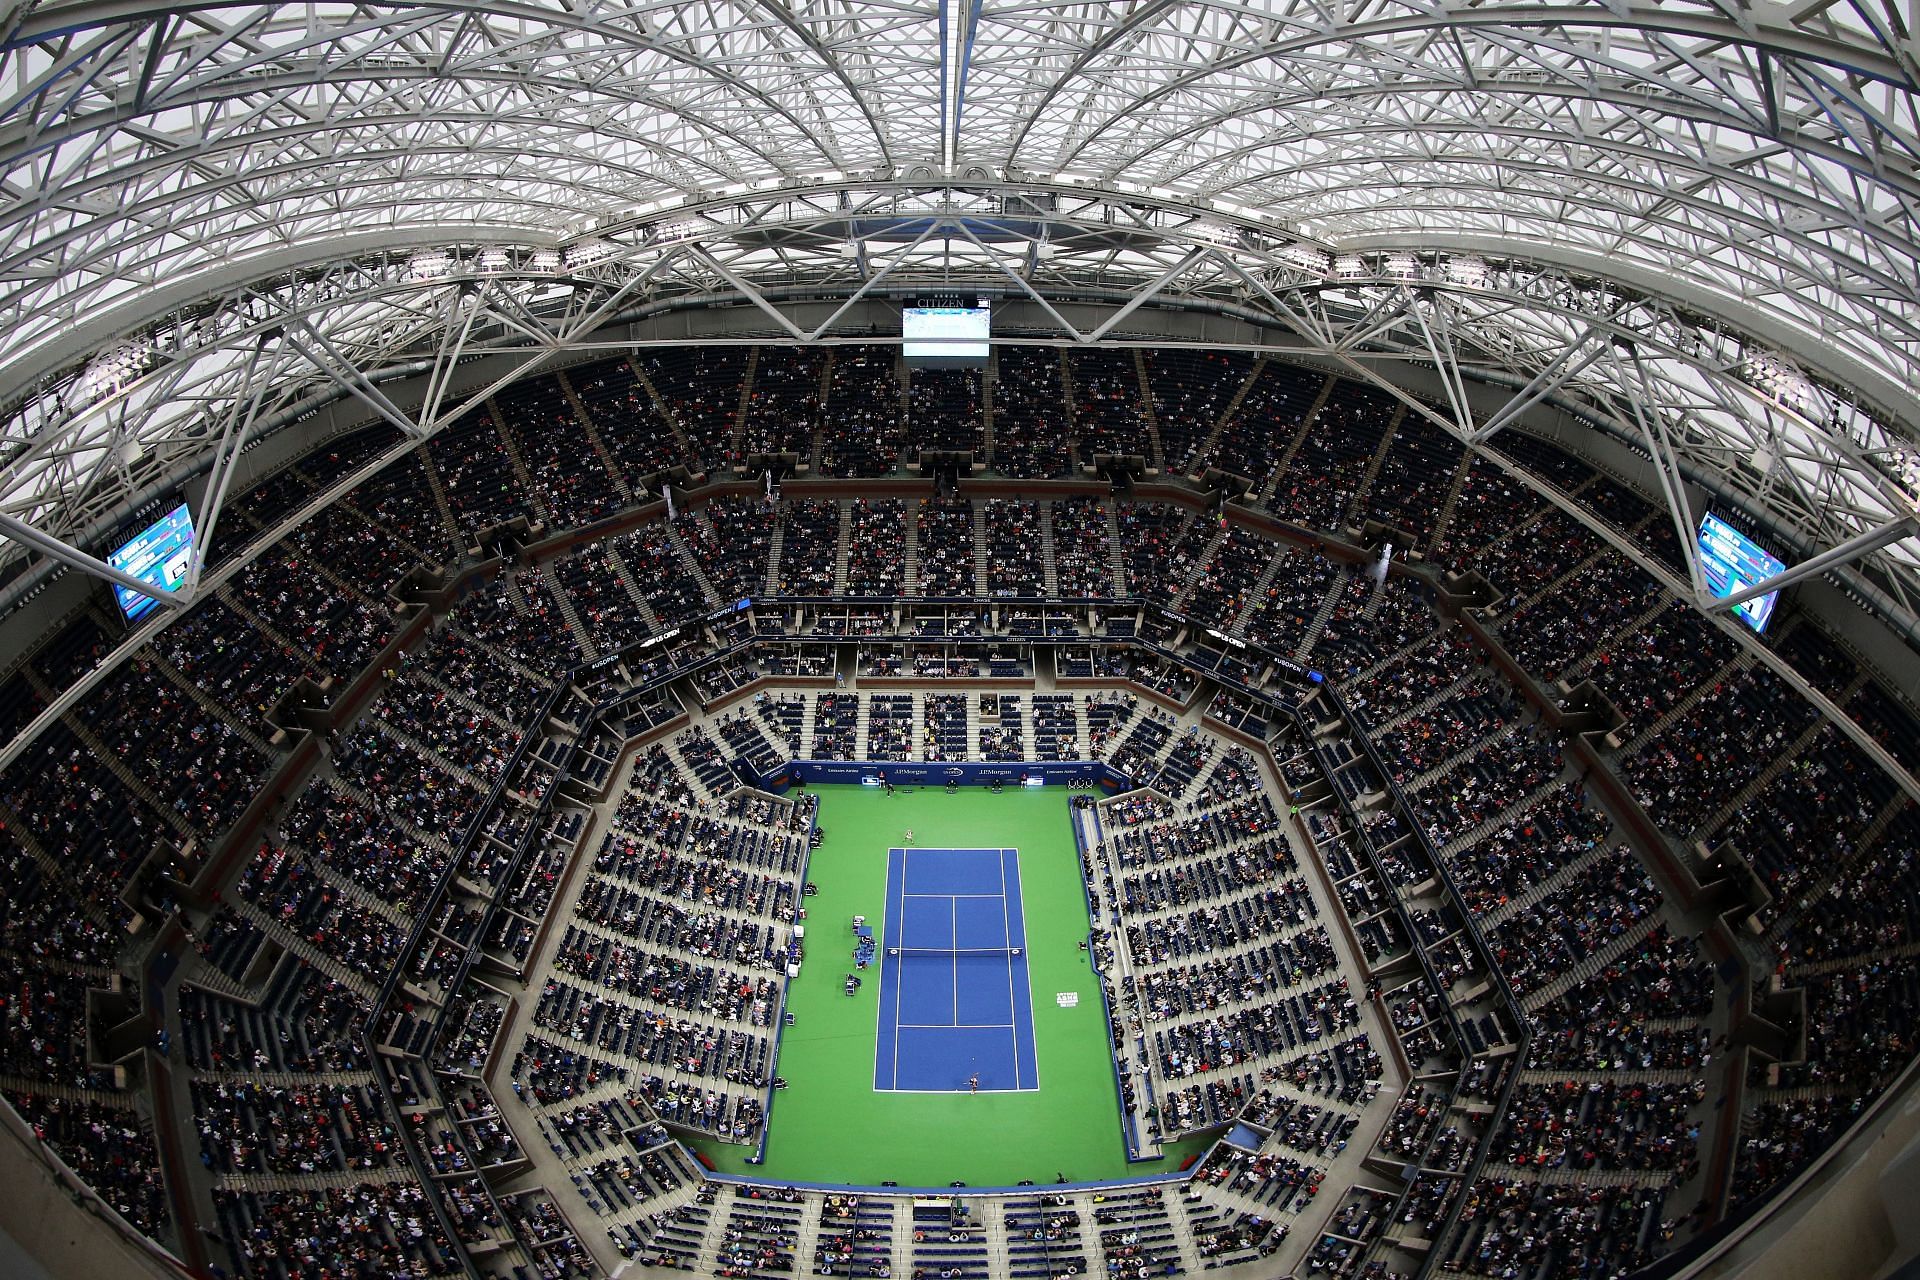 The Arthur Ashe Stadium is located in Queens, New York